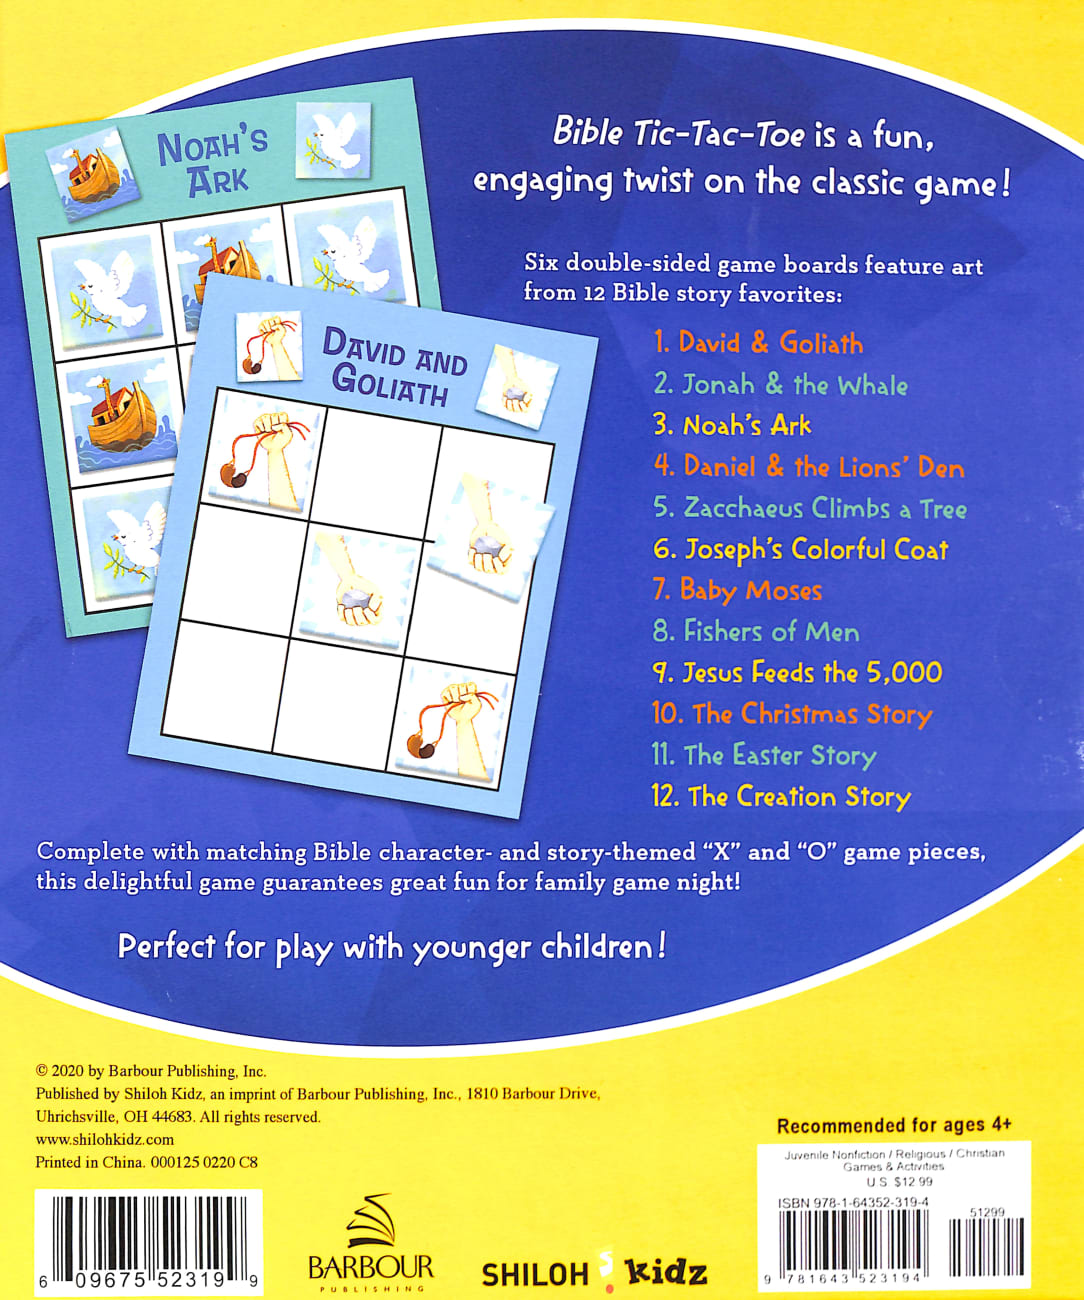 Bible Tic-Tac-Toe: Family Game Night Fun For All Ages! Game